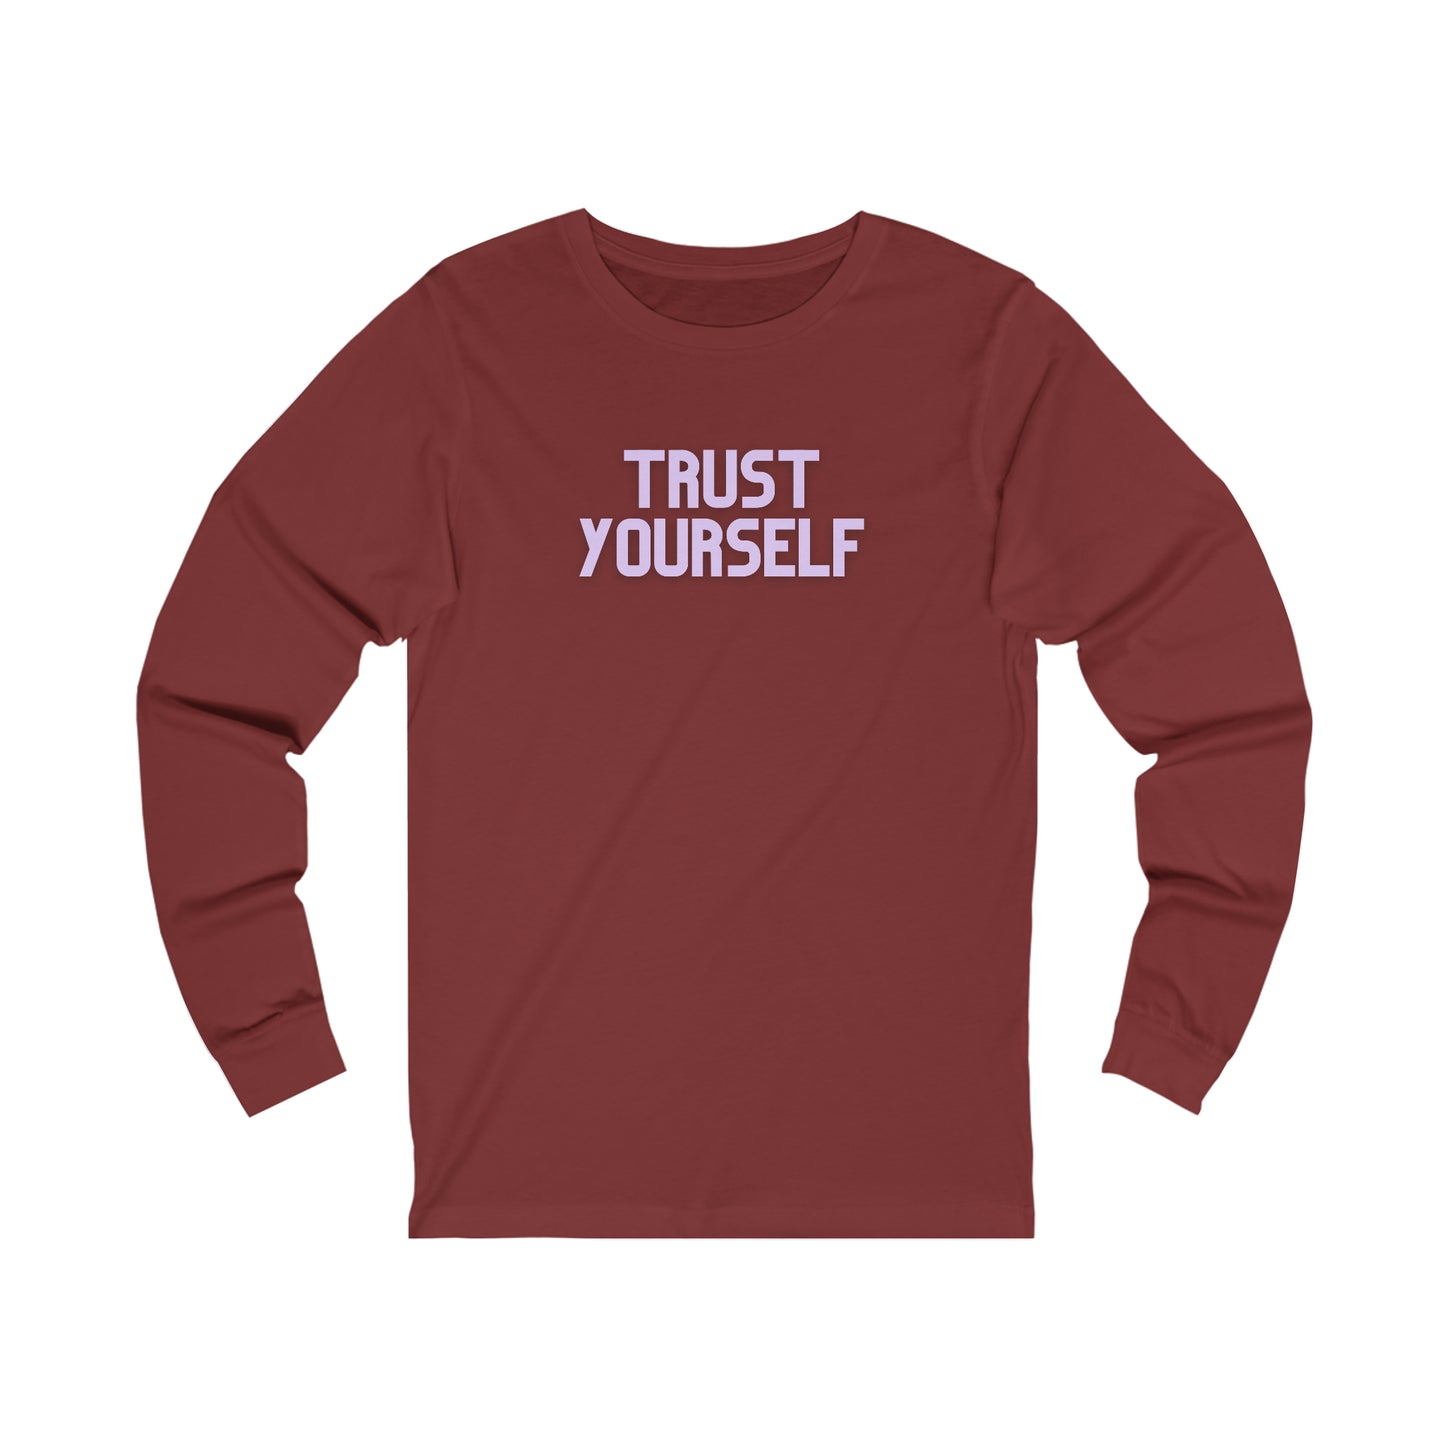 Simple "TRUST YOURSELF" message on this Unisex Jersey Long Sleeve Tee.